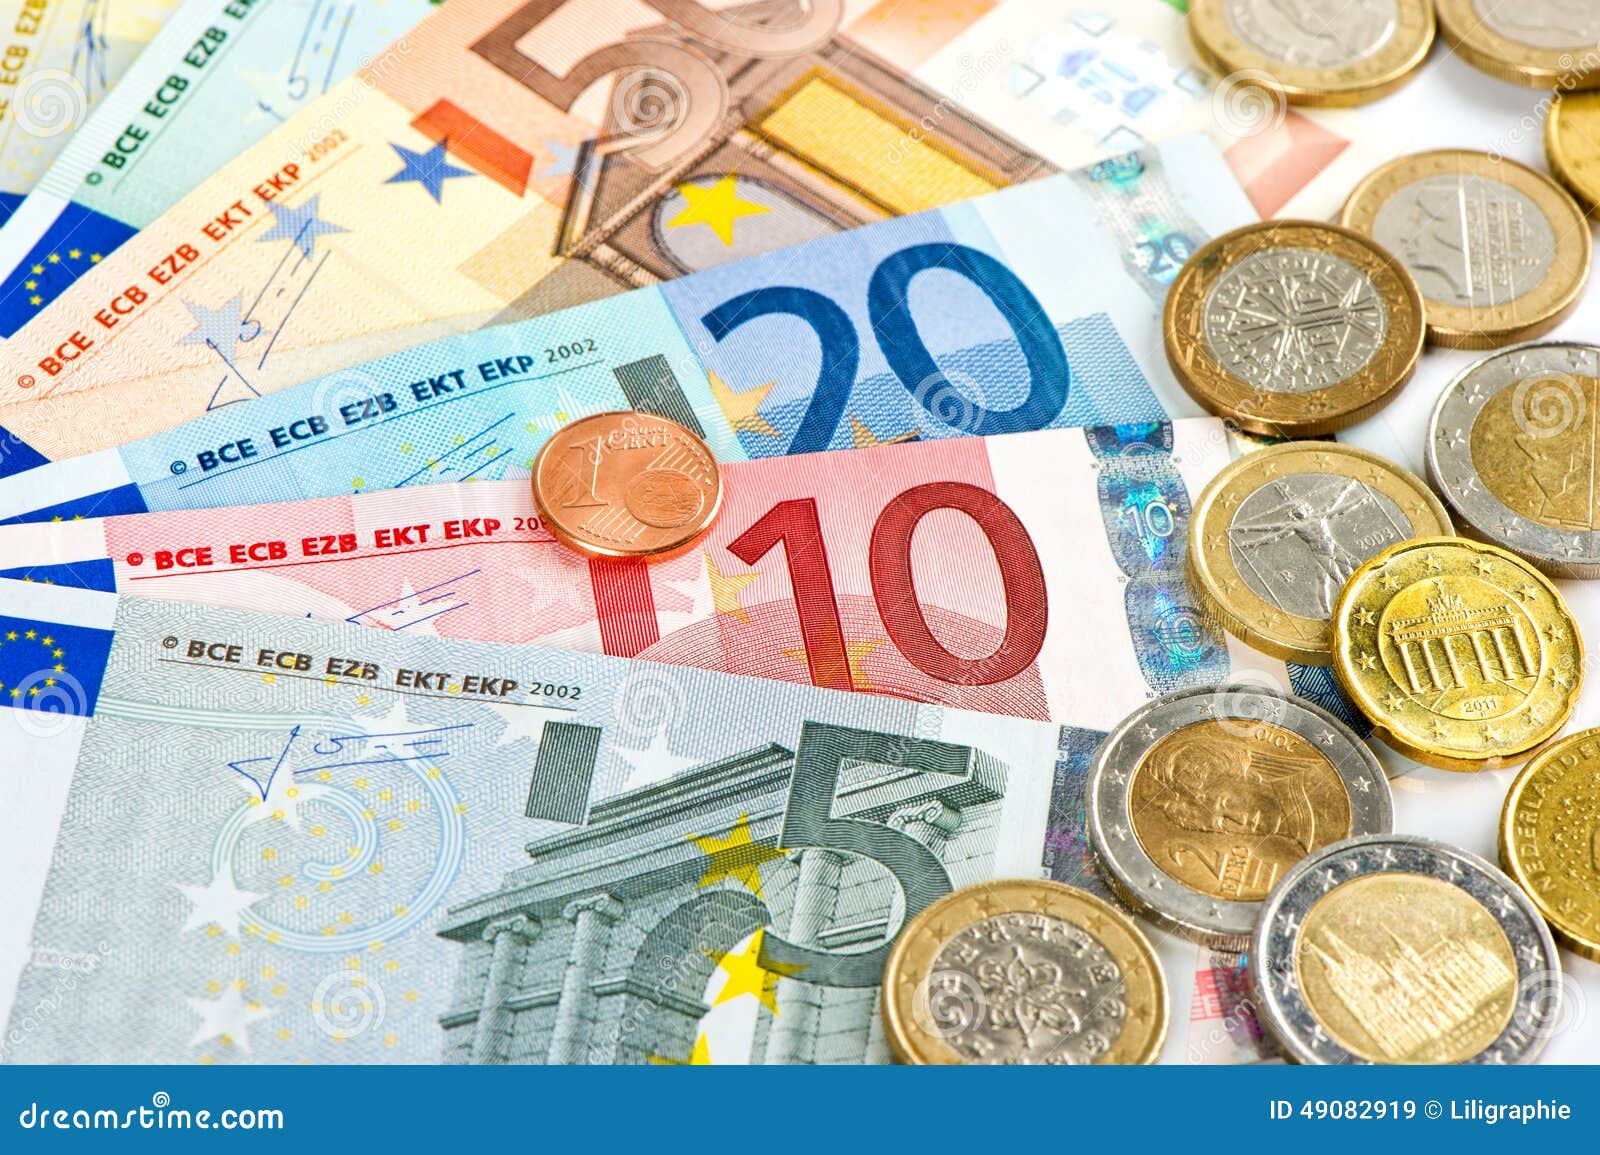 euro currency. coins and banknotes. cash money